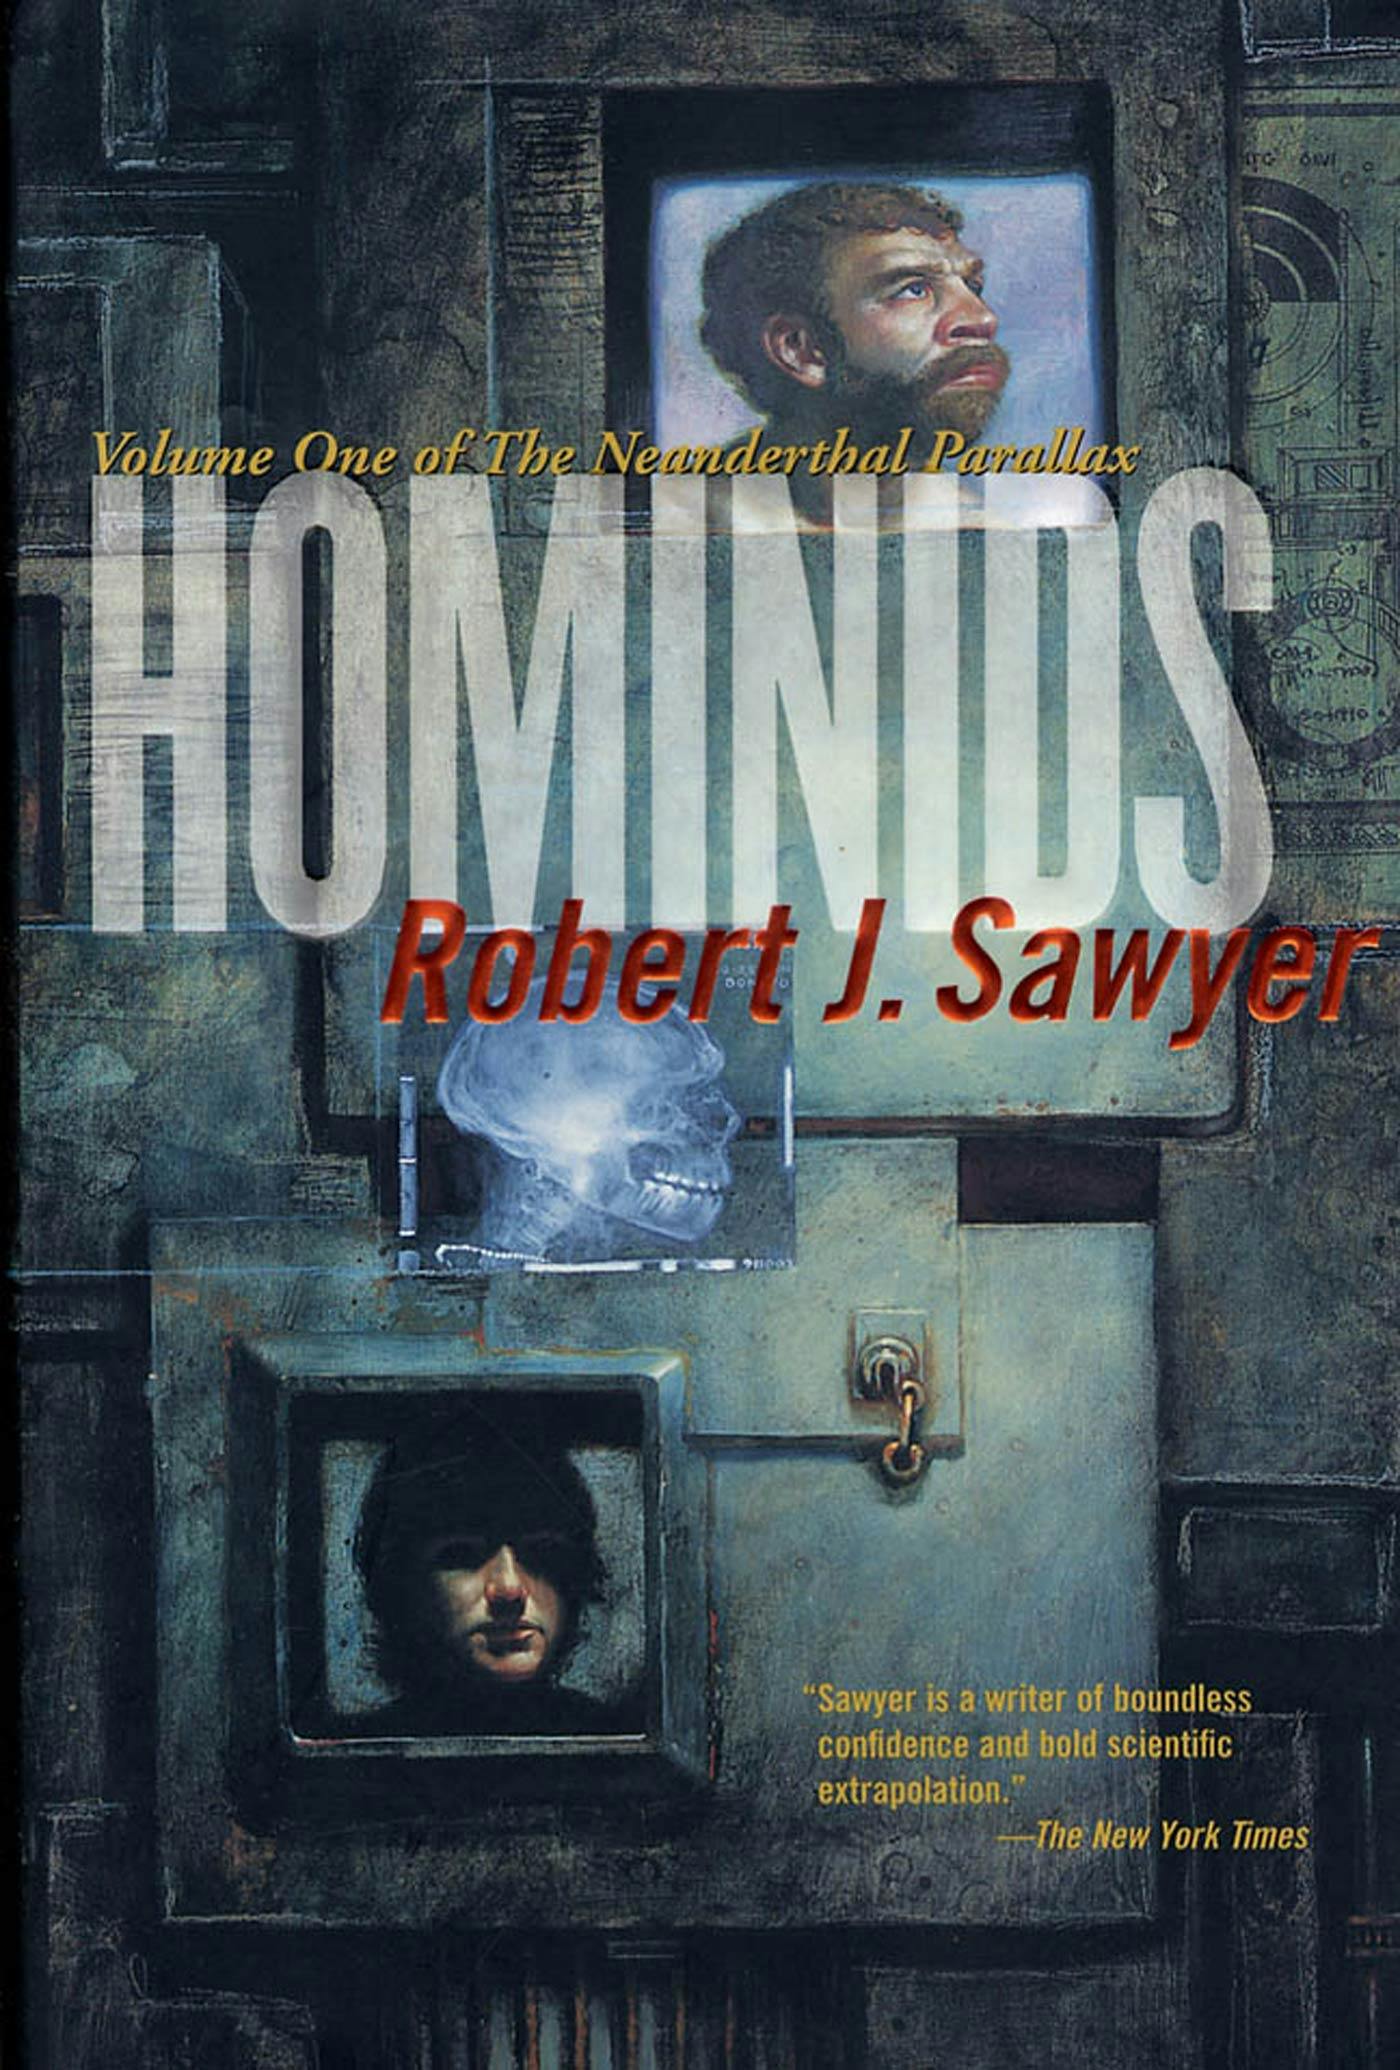 Cover for the book titled as: Hominids